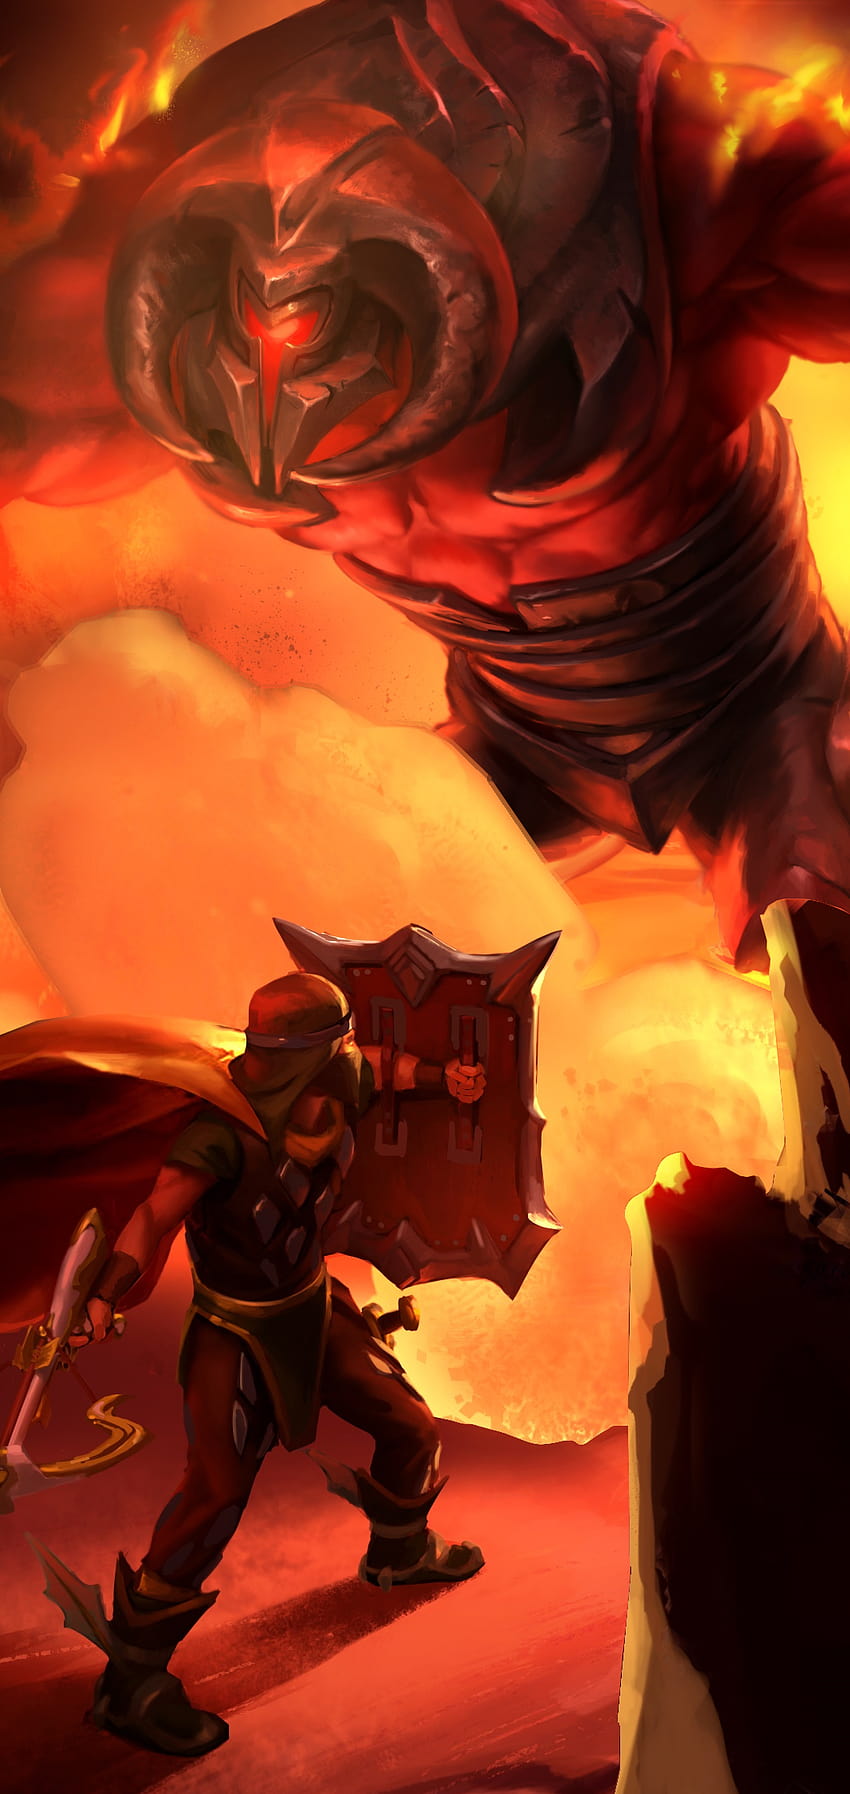 Phone of the Inferno art: 2007scape HD phone wallpaper